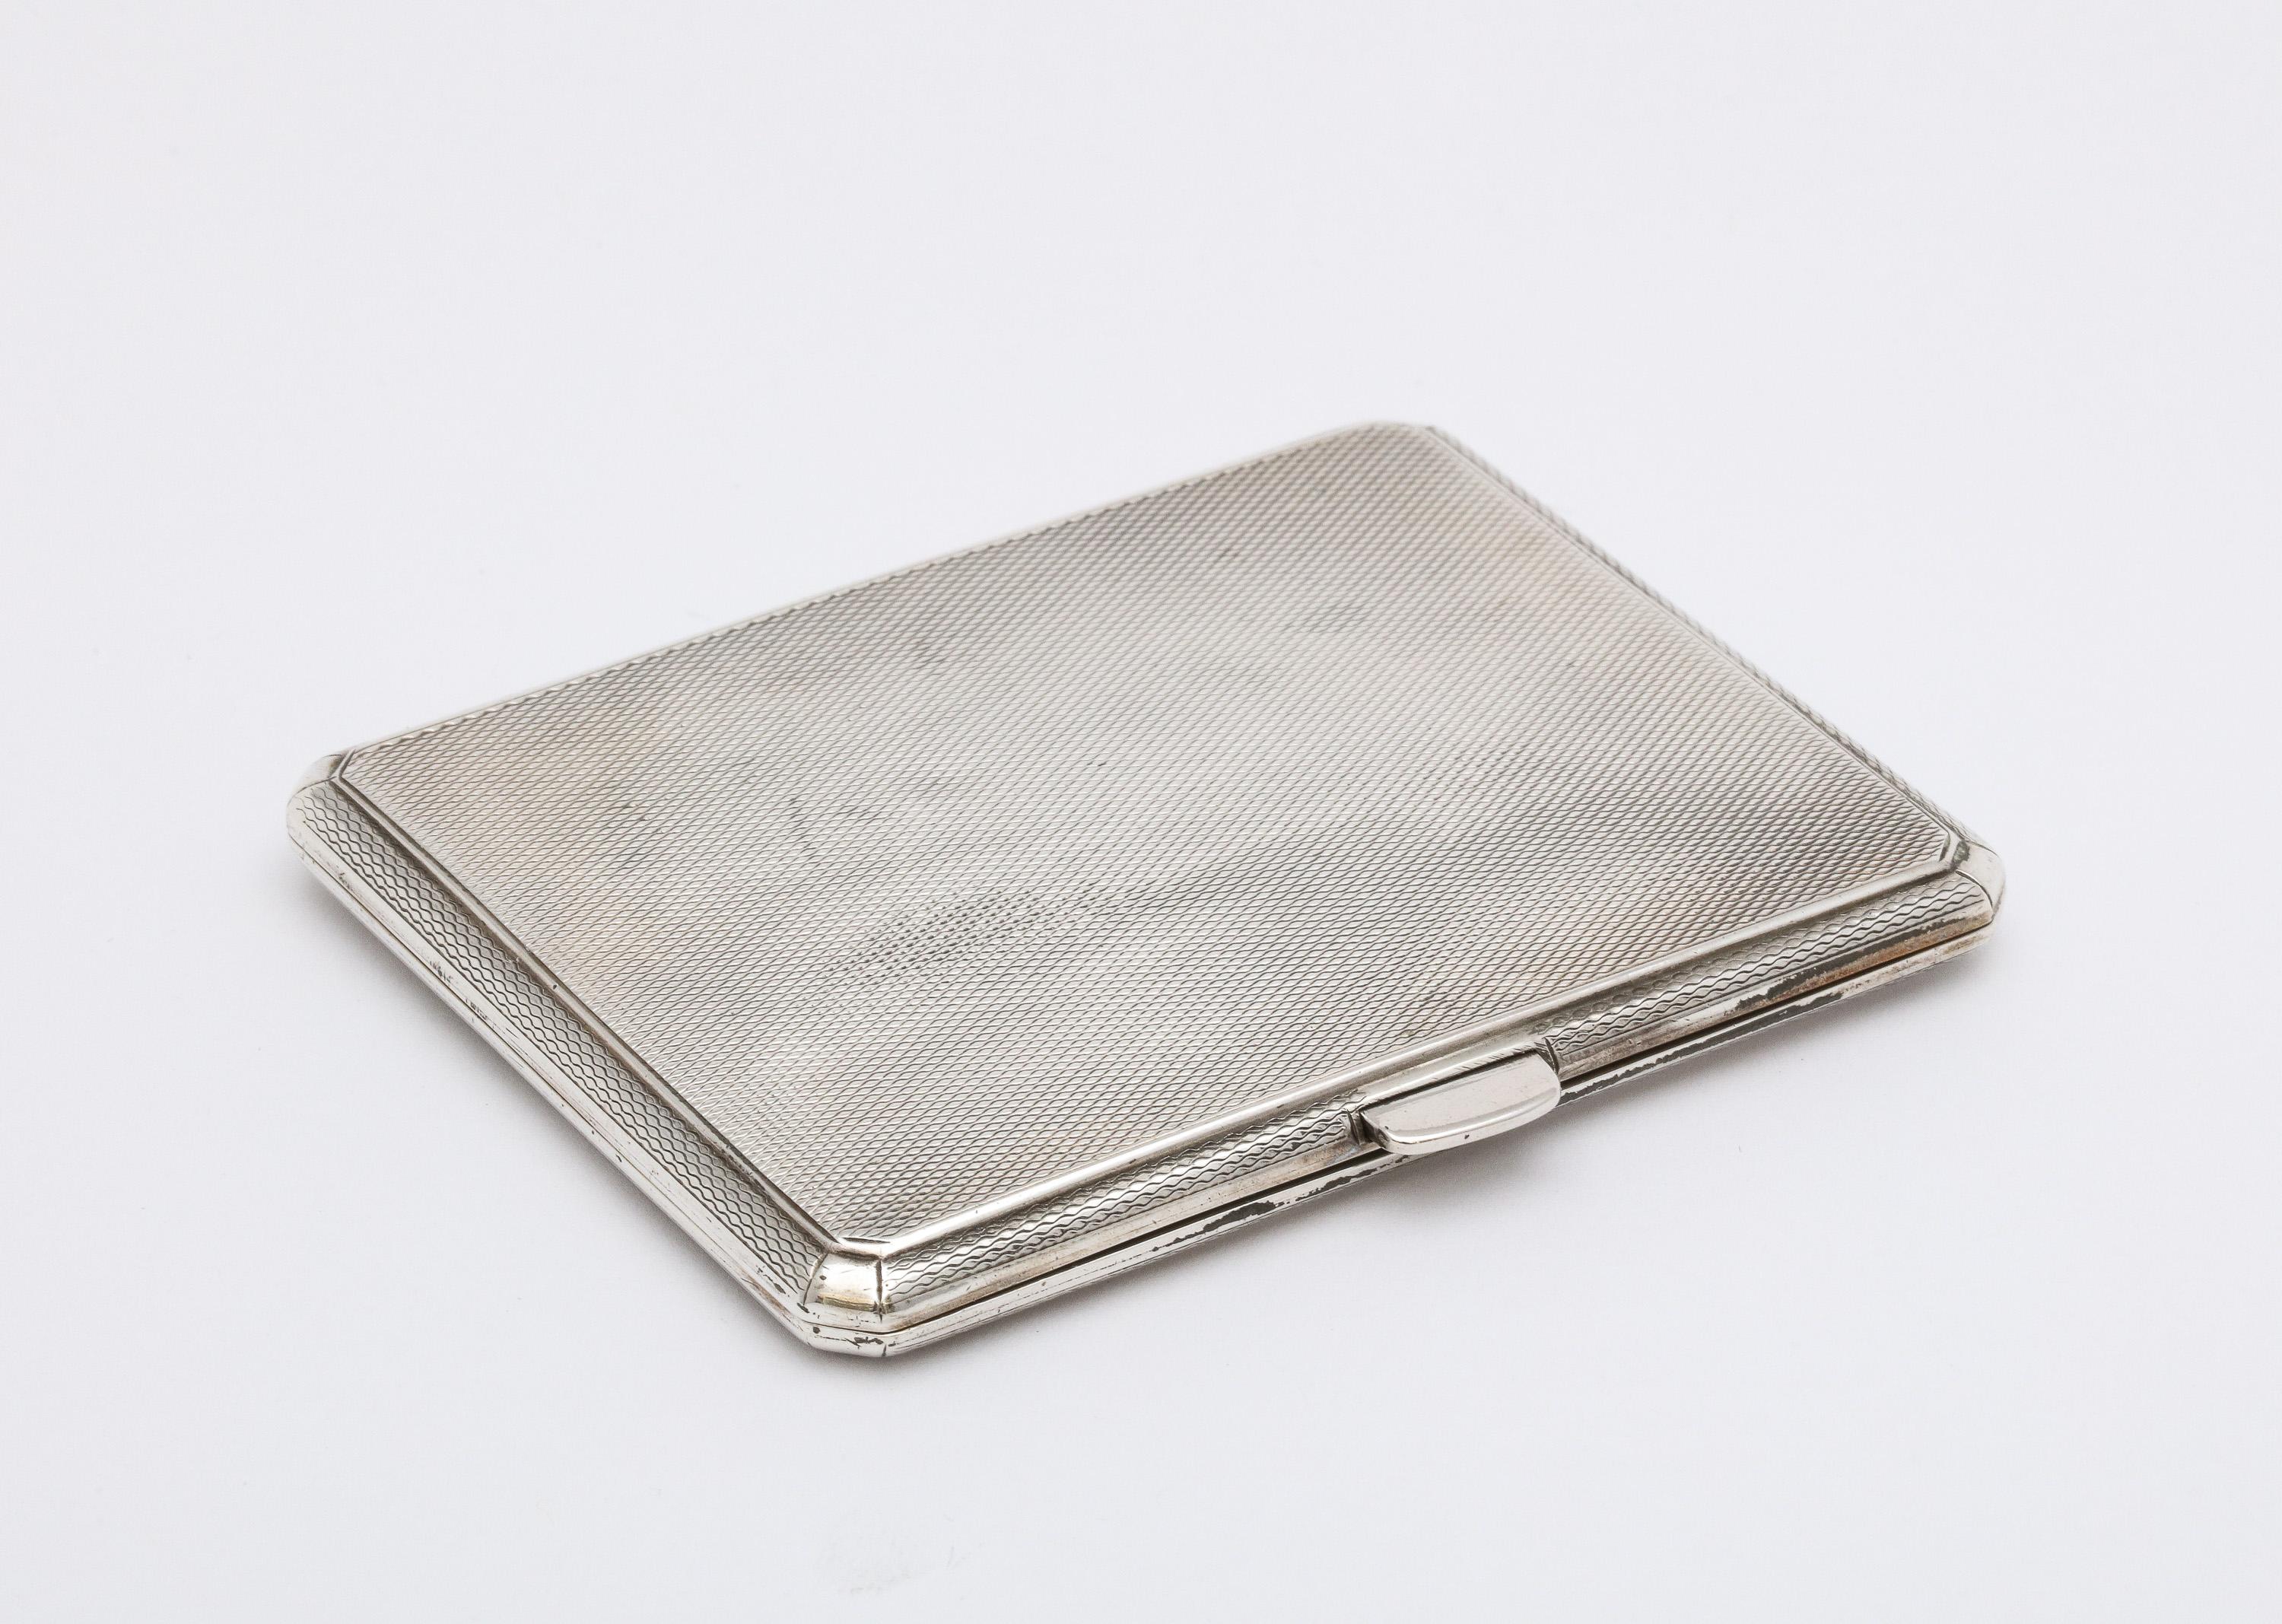 Art Deco Period Sterling Silver Engine Turned Cigarette Case In Good Condition For Sale In New York, NY